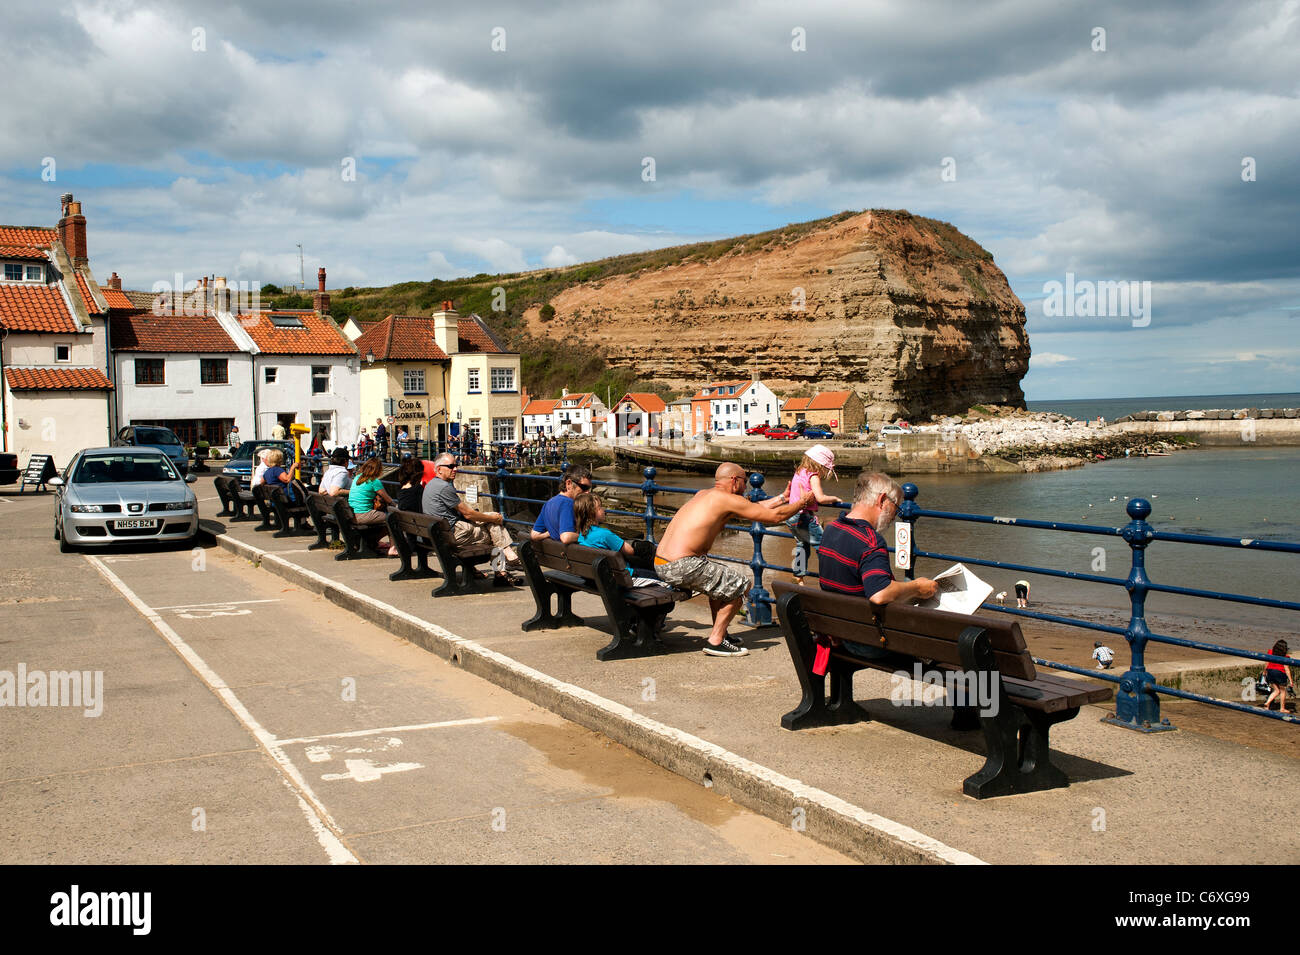 People enjoying nice weather at Staithes, North East, UK. Aug 2011 Stock Photo